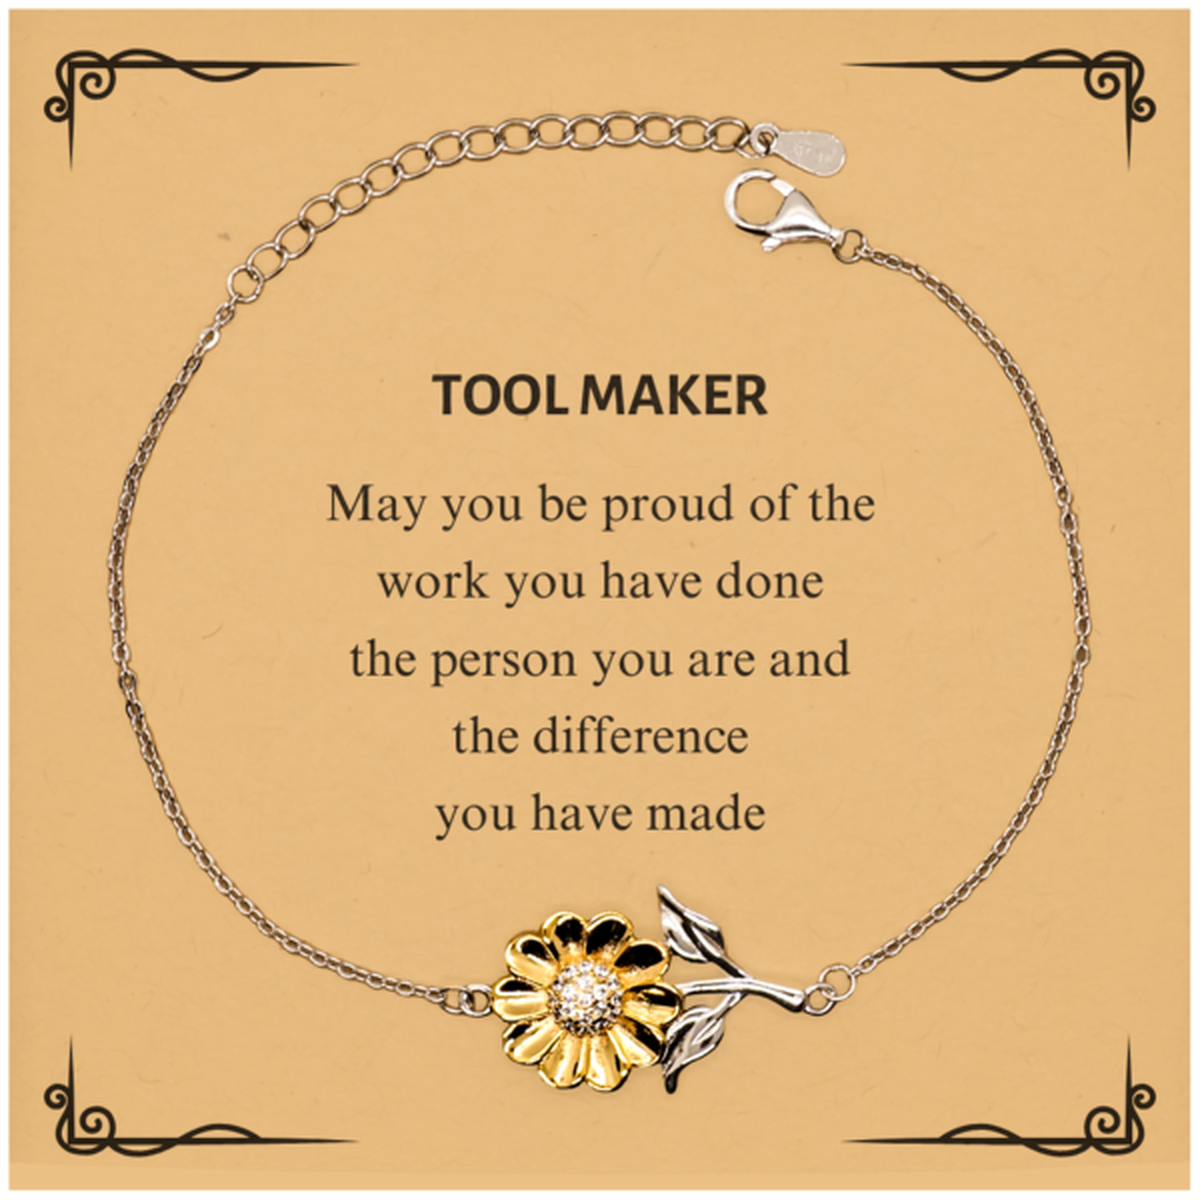 Tool Maker May you be proud of the work you have done, Retirement Tool Maker Sunflower Bracelet for Colleague Appreciation Gifts Amazing for Tool Maker